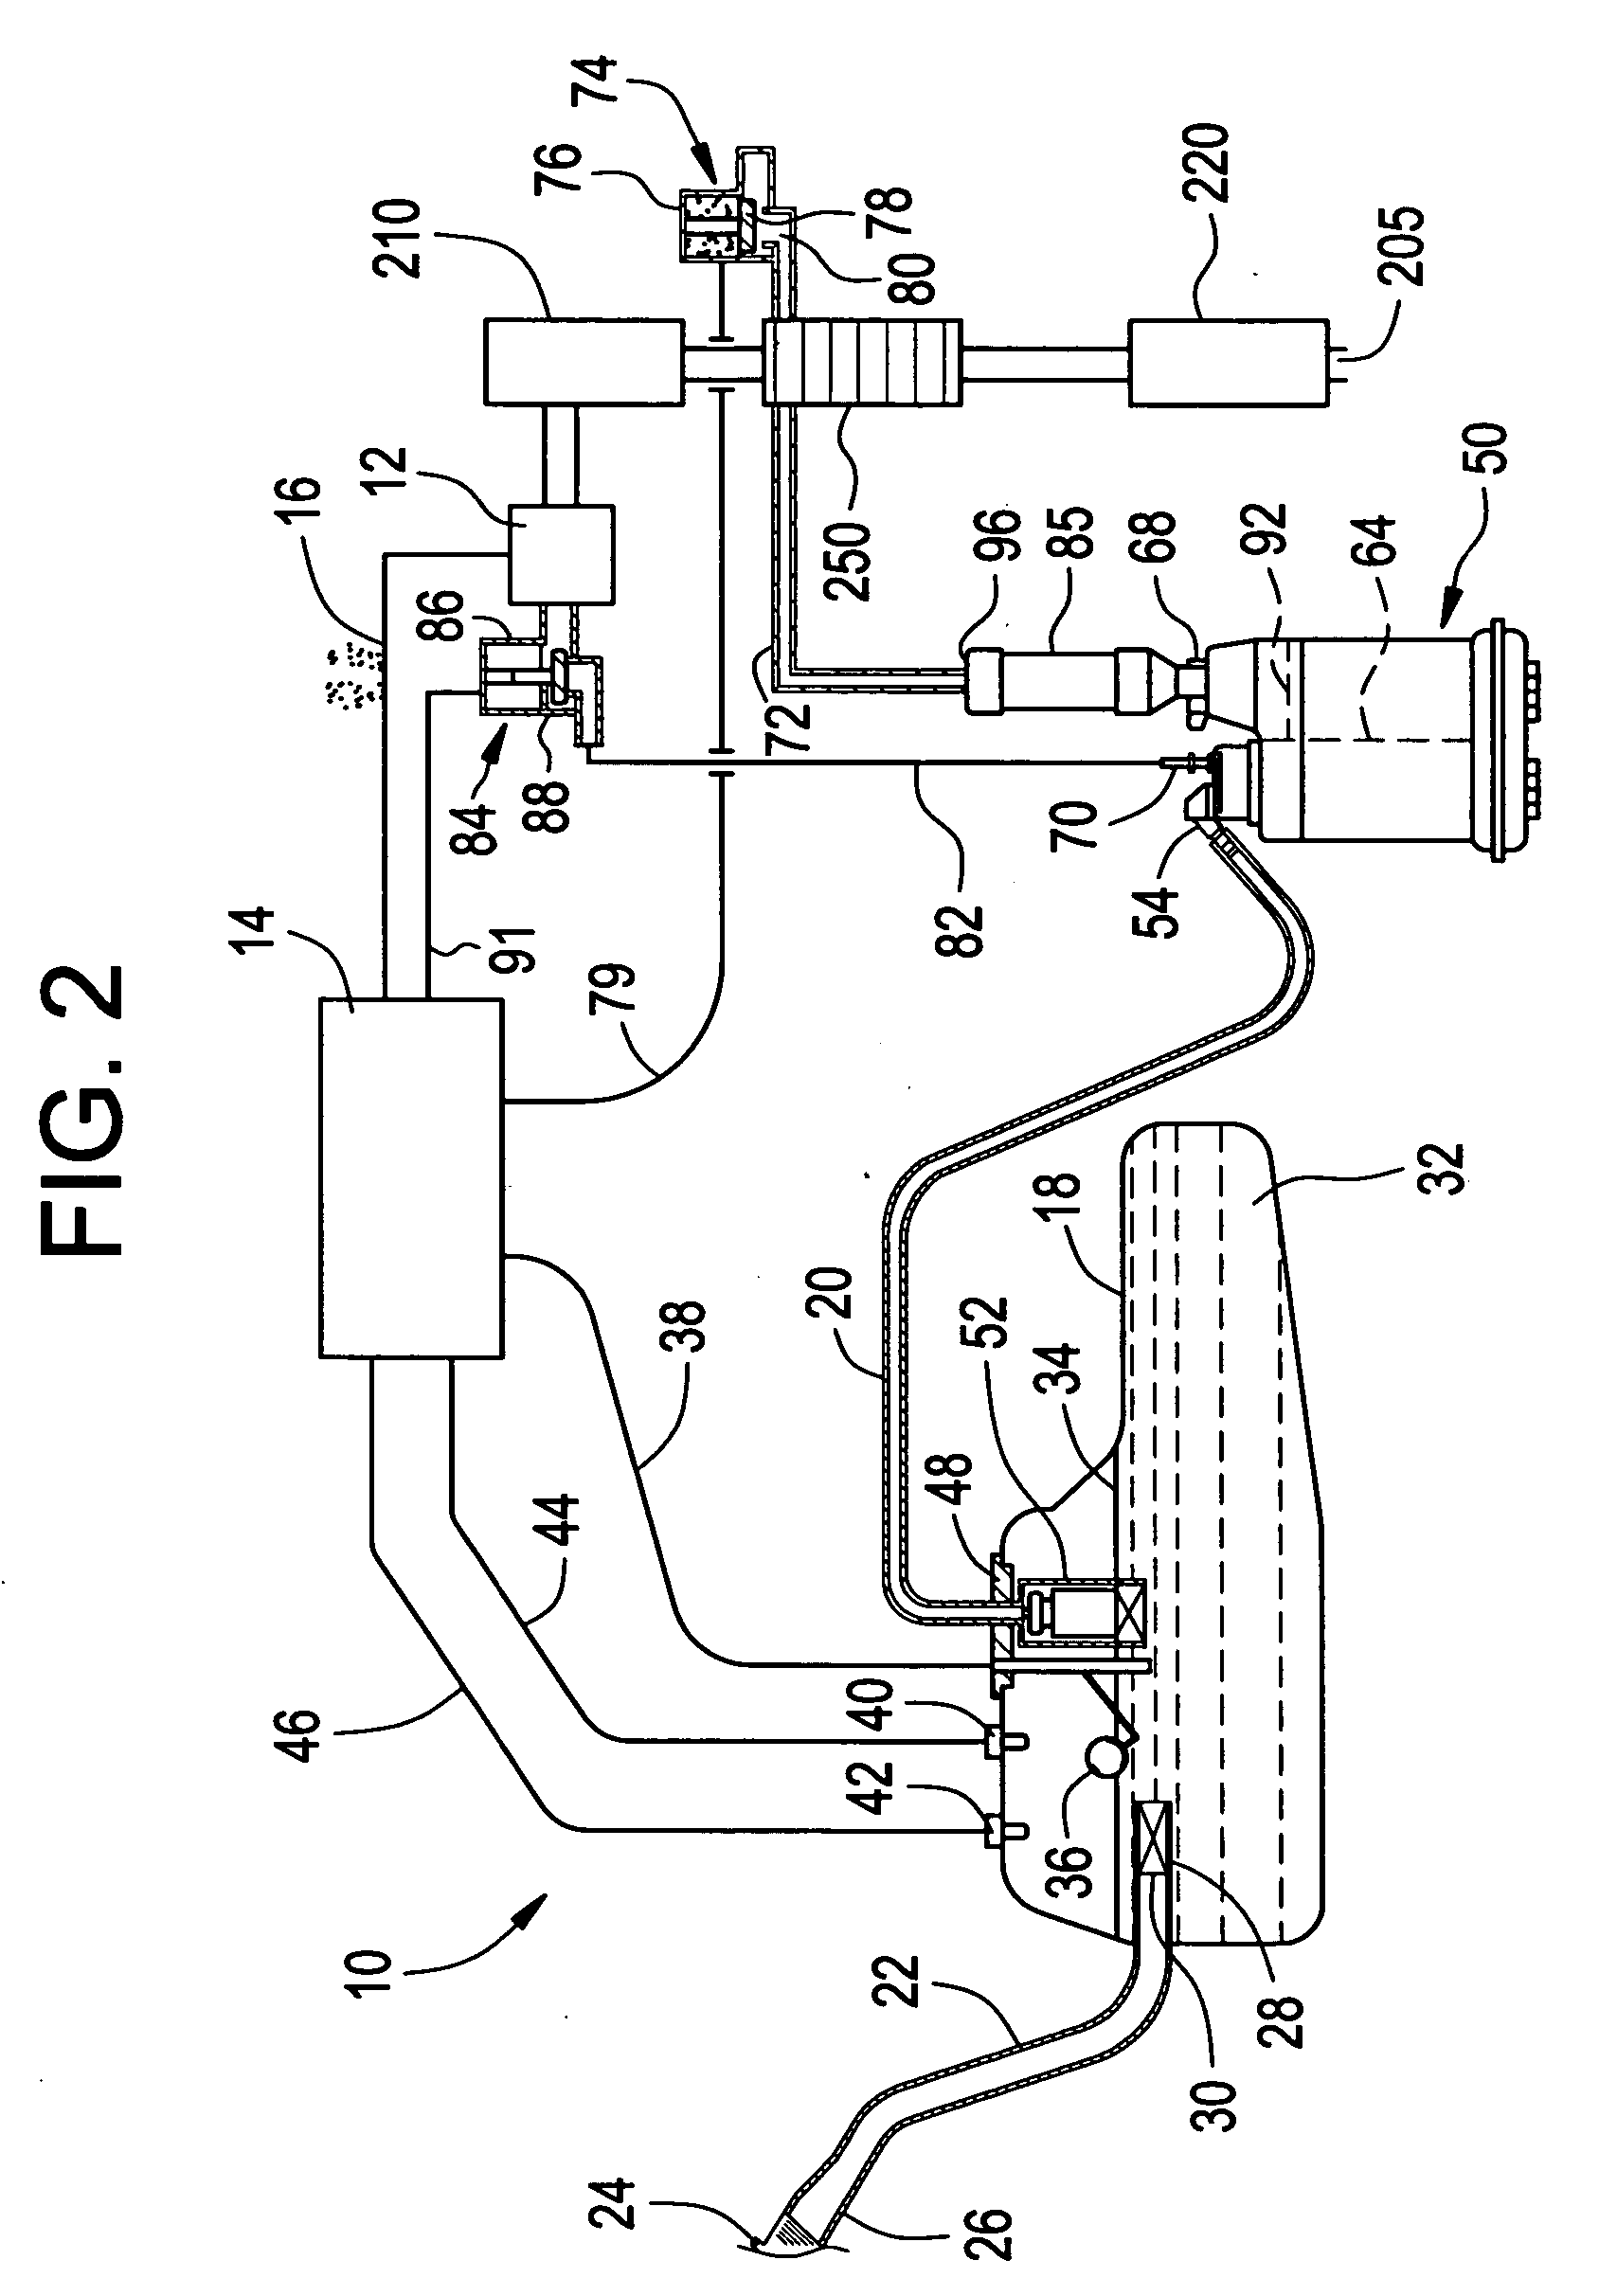 Method and system of purging evaporative emission control canister using heated purge air